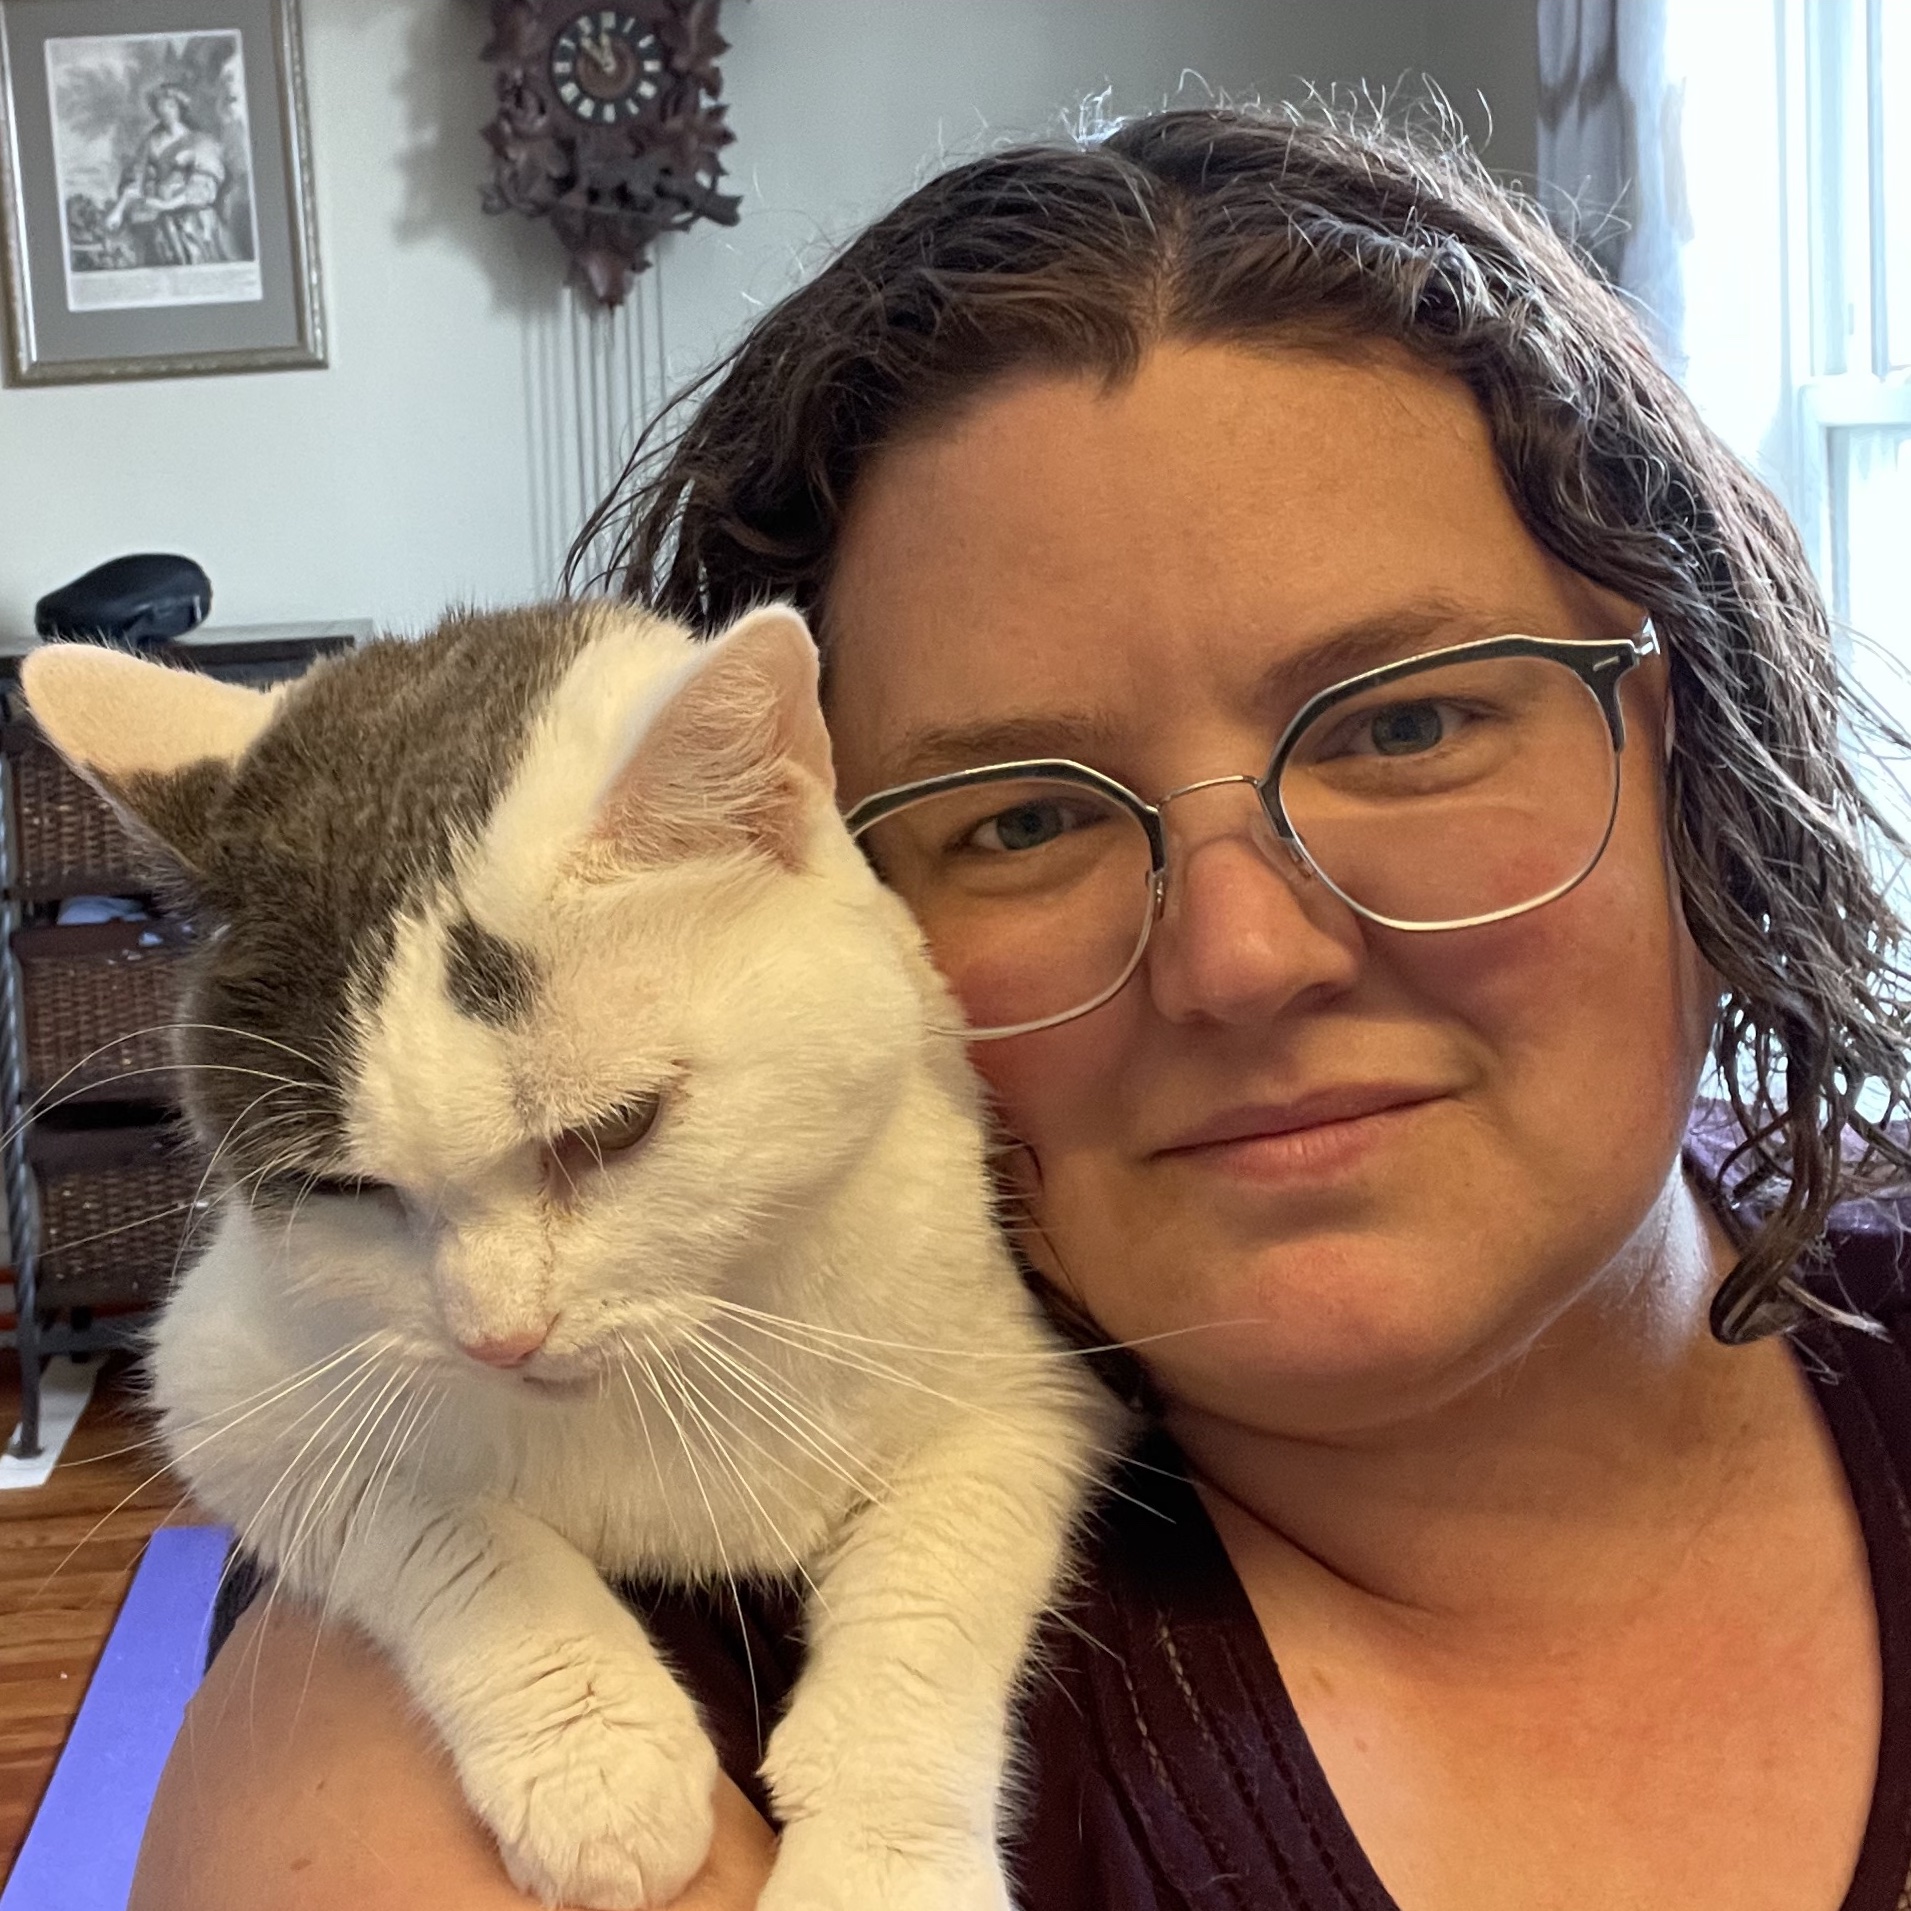 A smiling white woman with glasses, rosy cheeks, and curly brown hair. Her pretty white-and-grey cat is on her shoulder.